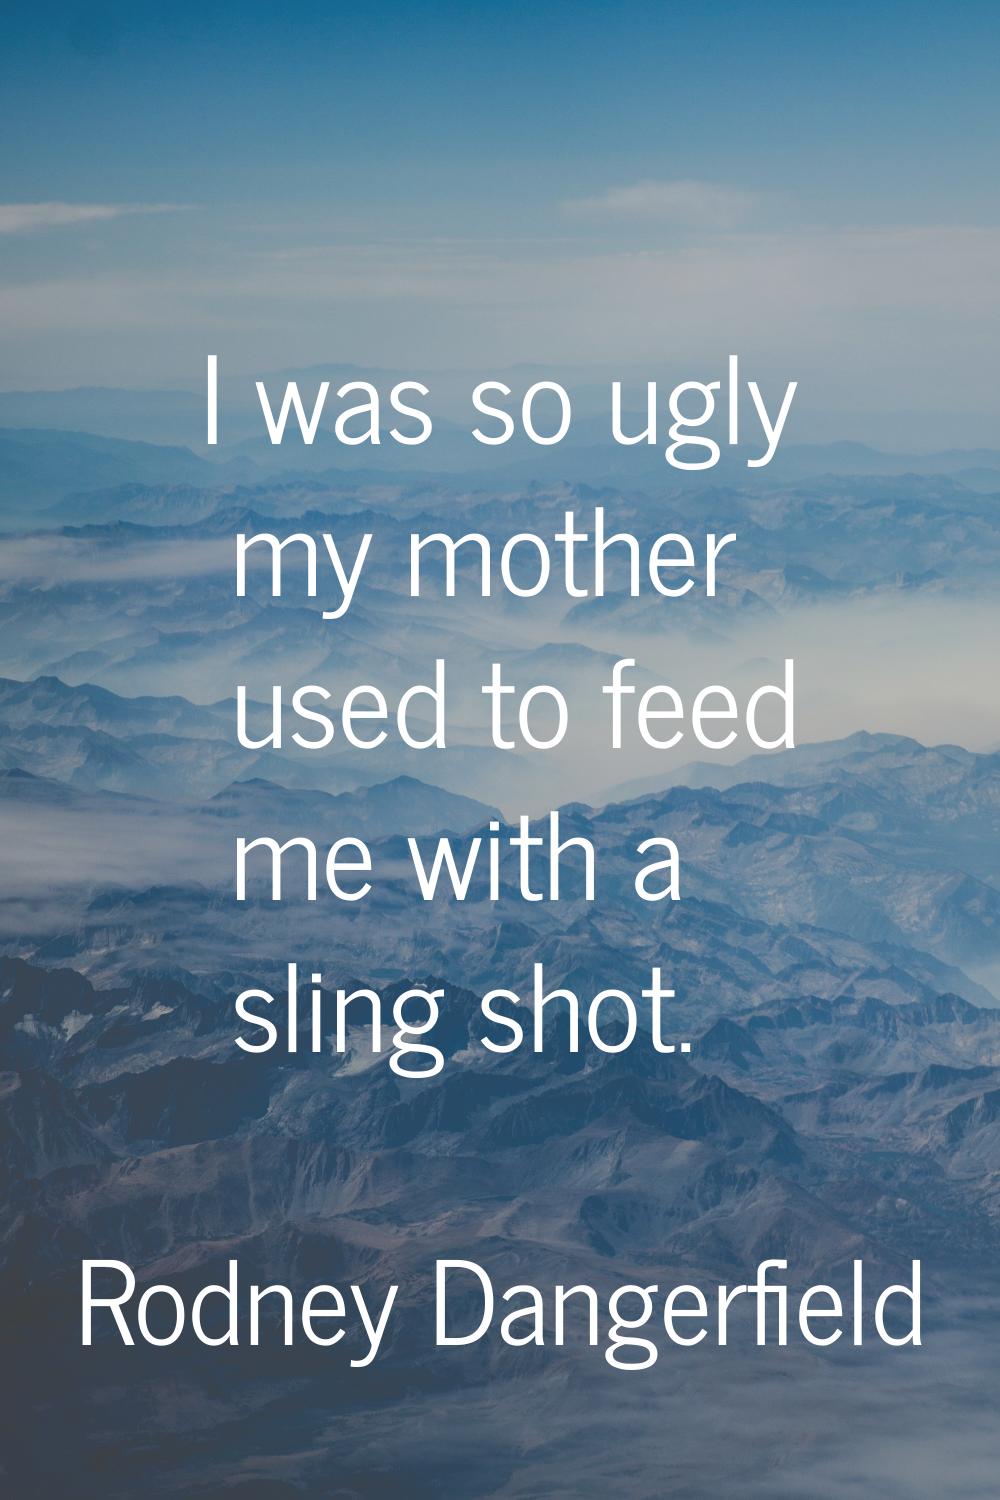 I was so ugly my mother used to feed me with a sling shot.